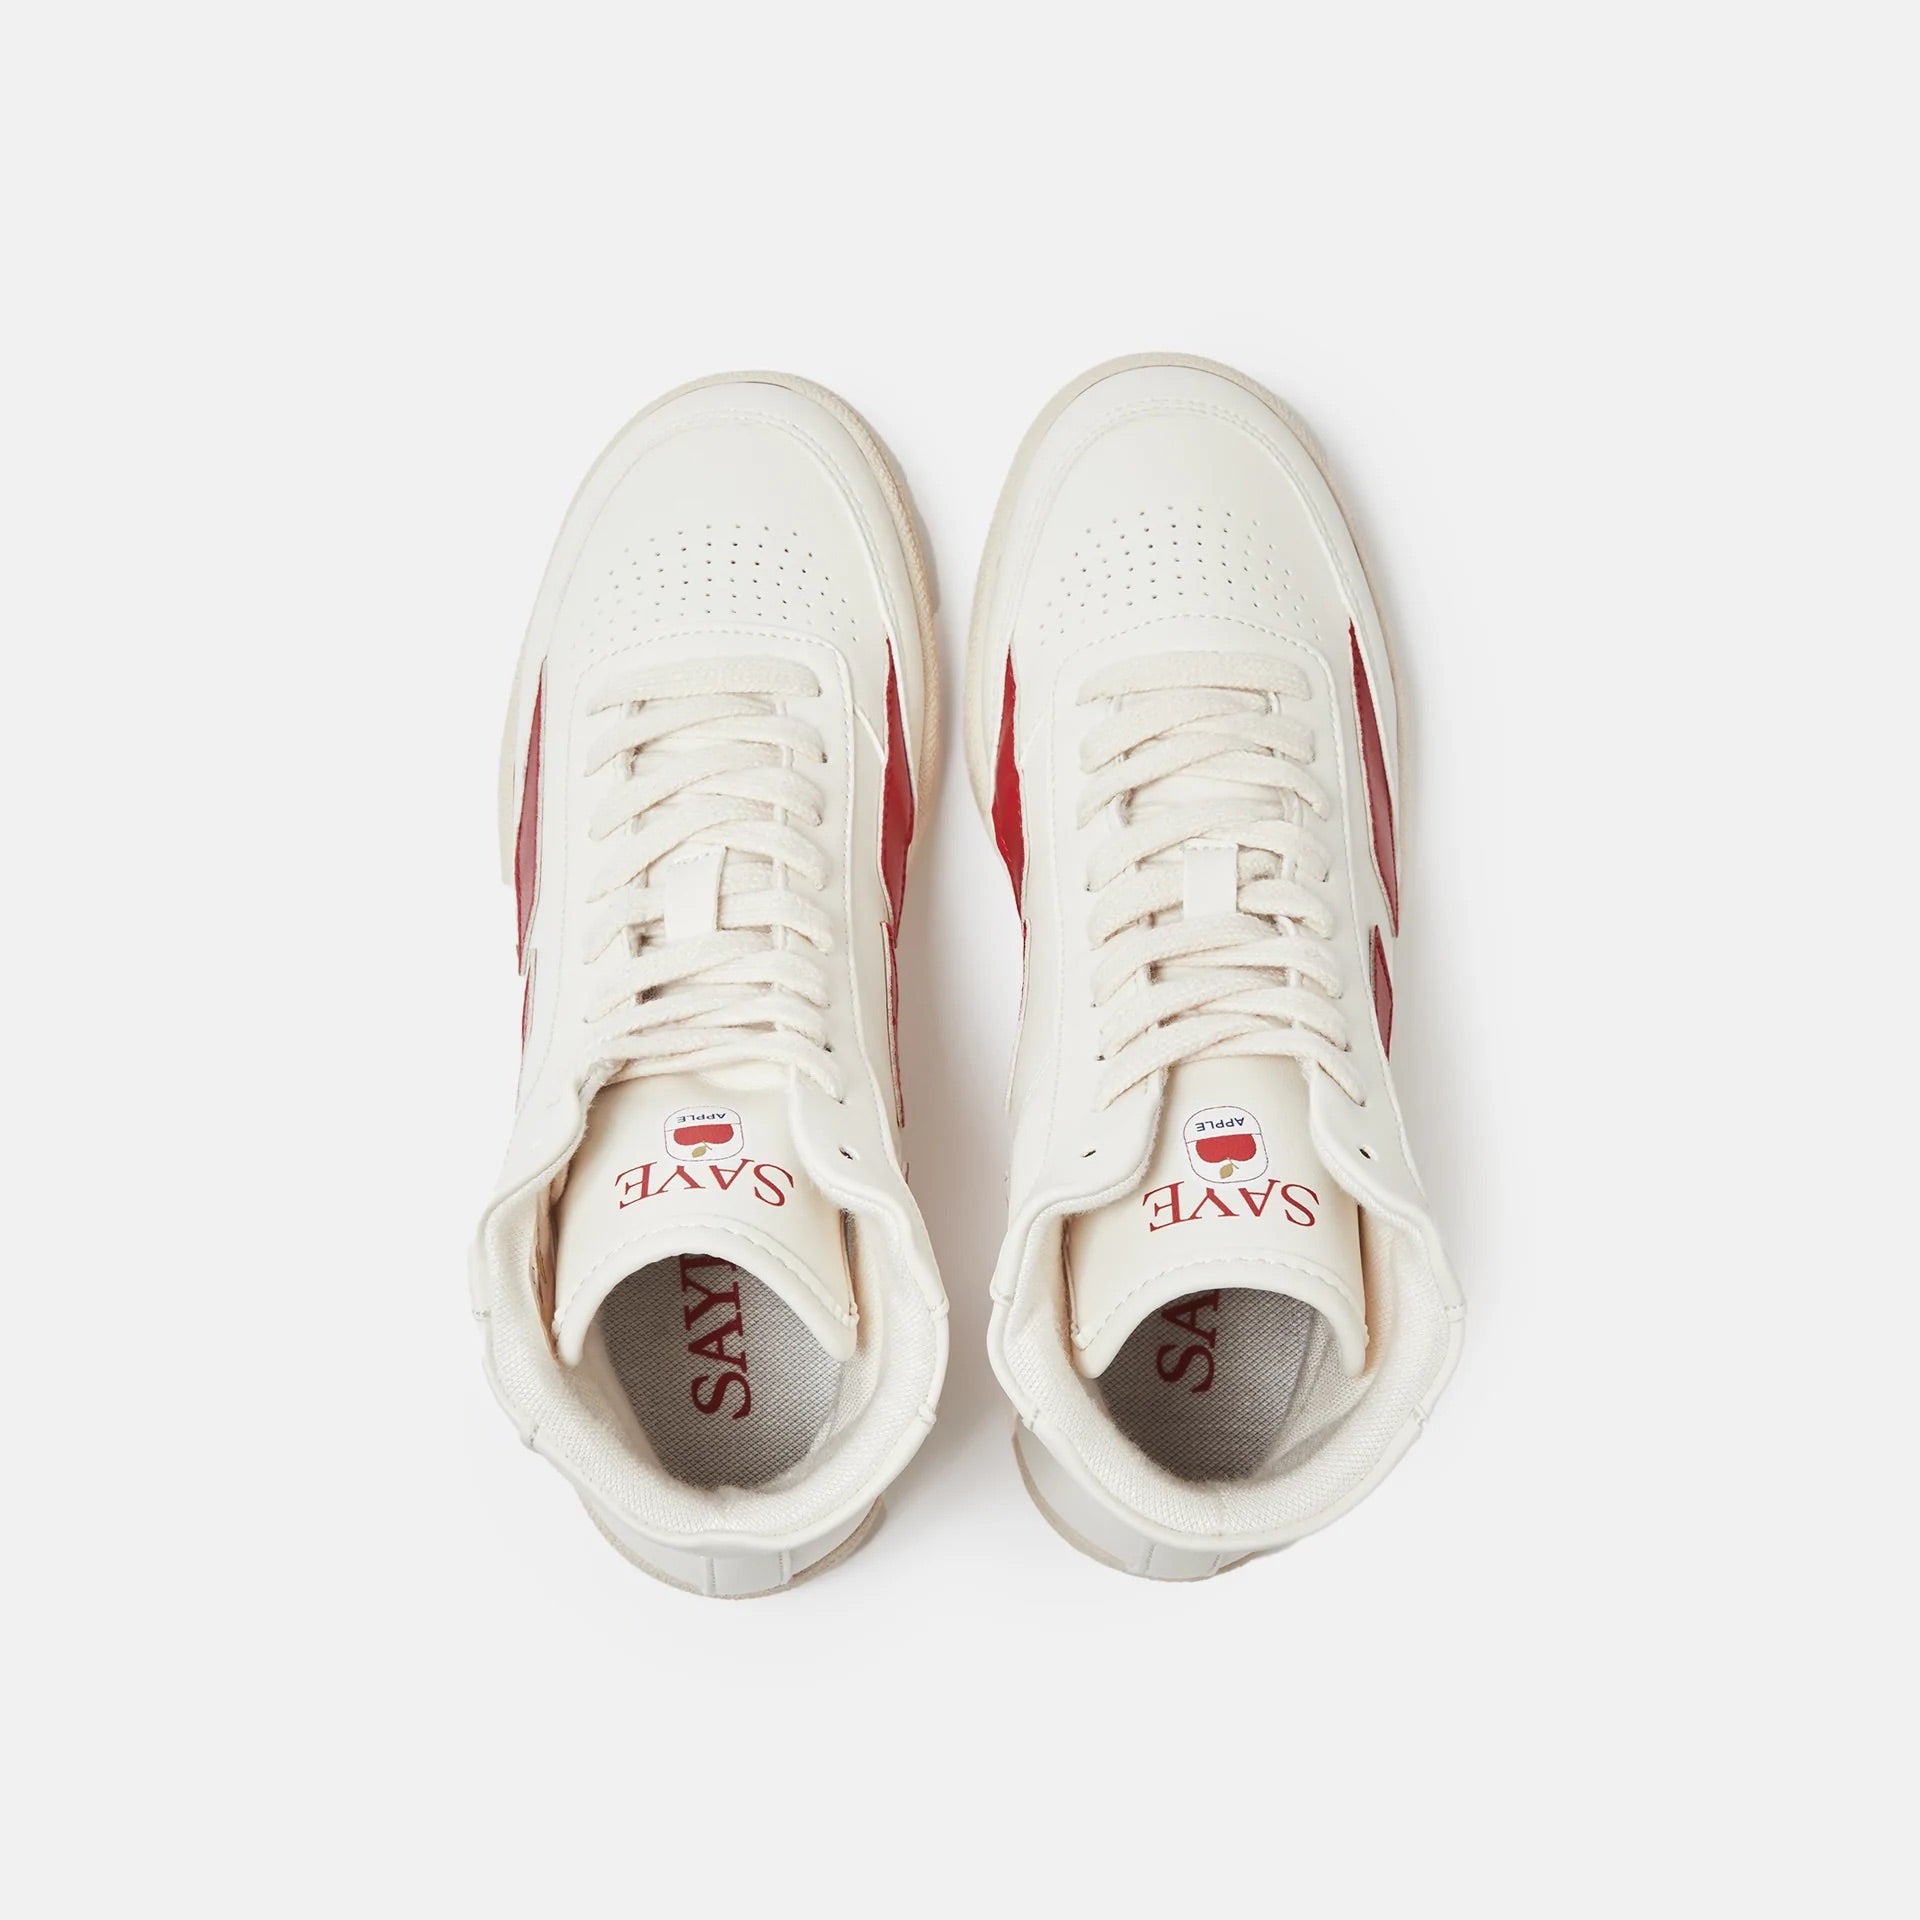 A pair of Modelo '89 Hi Sneakers by SAYE on a white surface, made with vegan leather and featuring a bamboo lining.